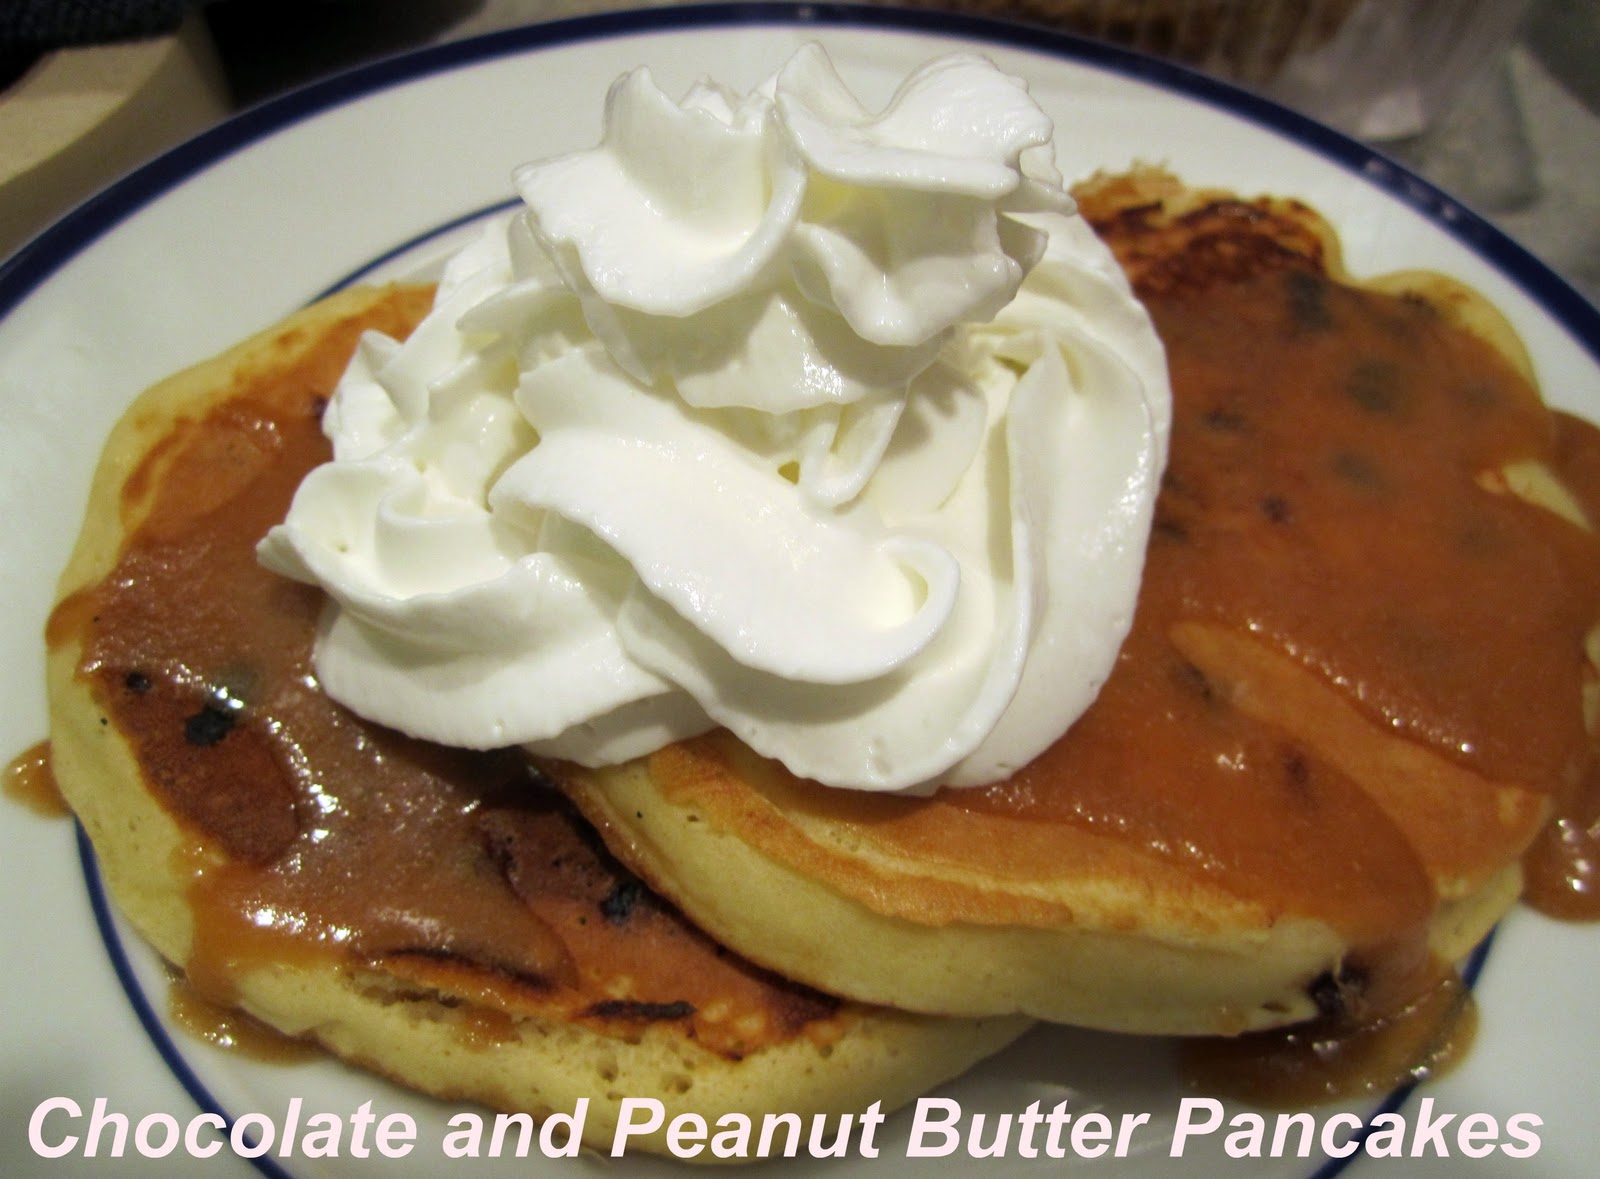 Peanut how butter bisquick  Pancakes Peanut Chip to Chocolate pancakes and Butter with make   peanut Butter with Sauce